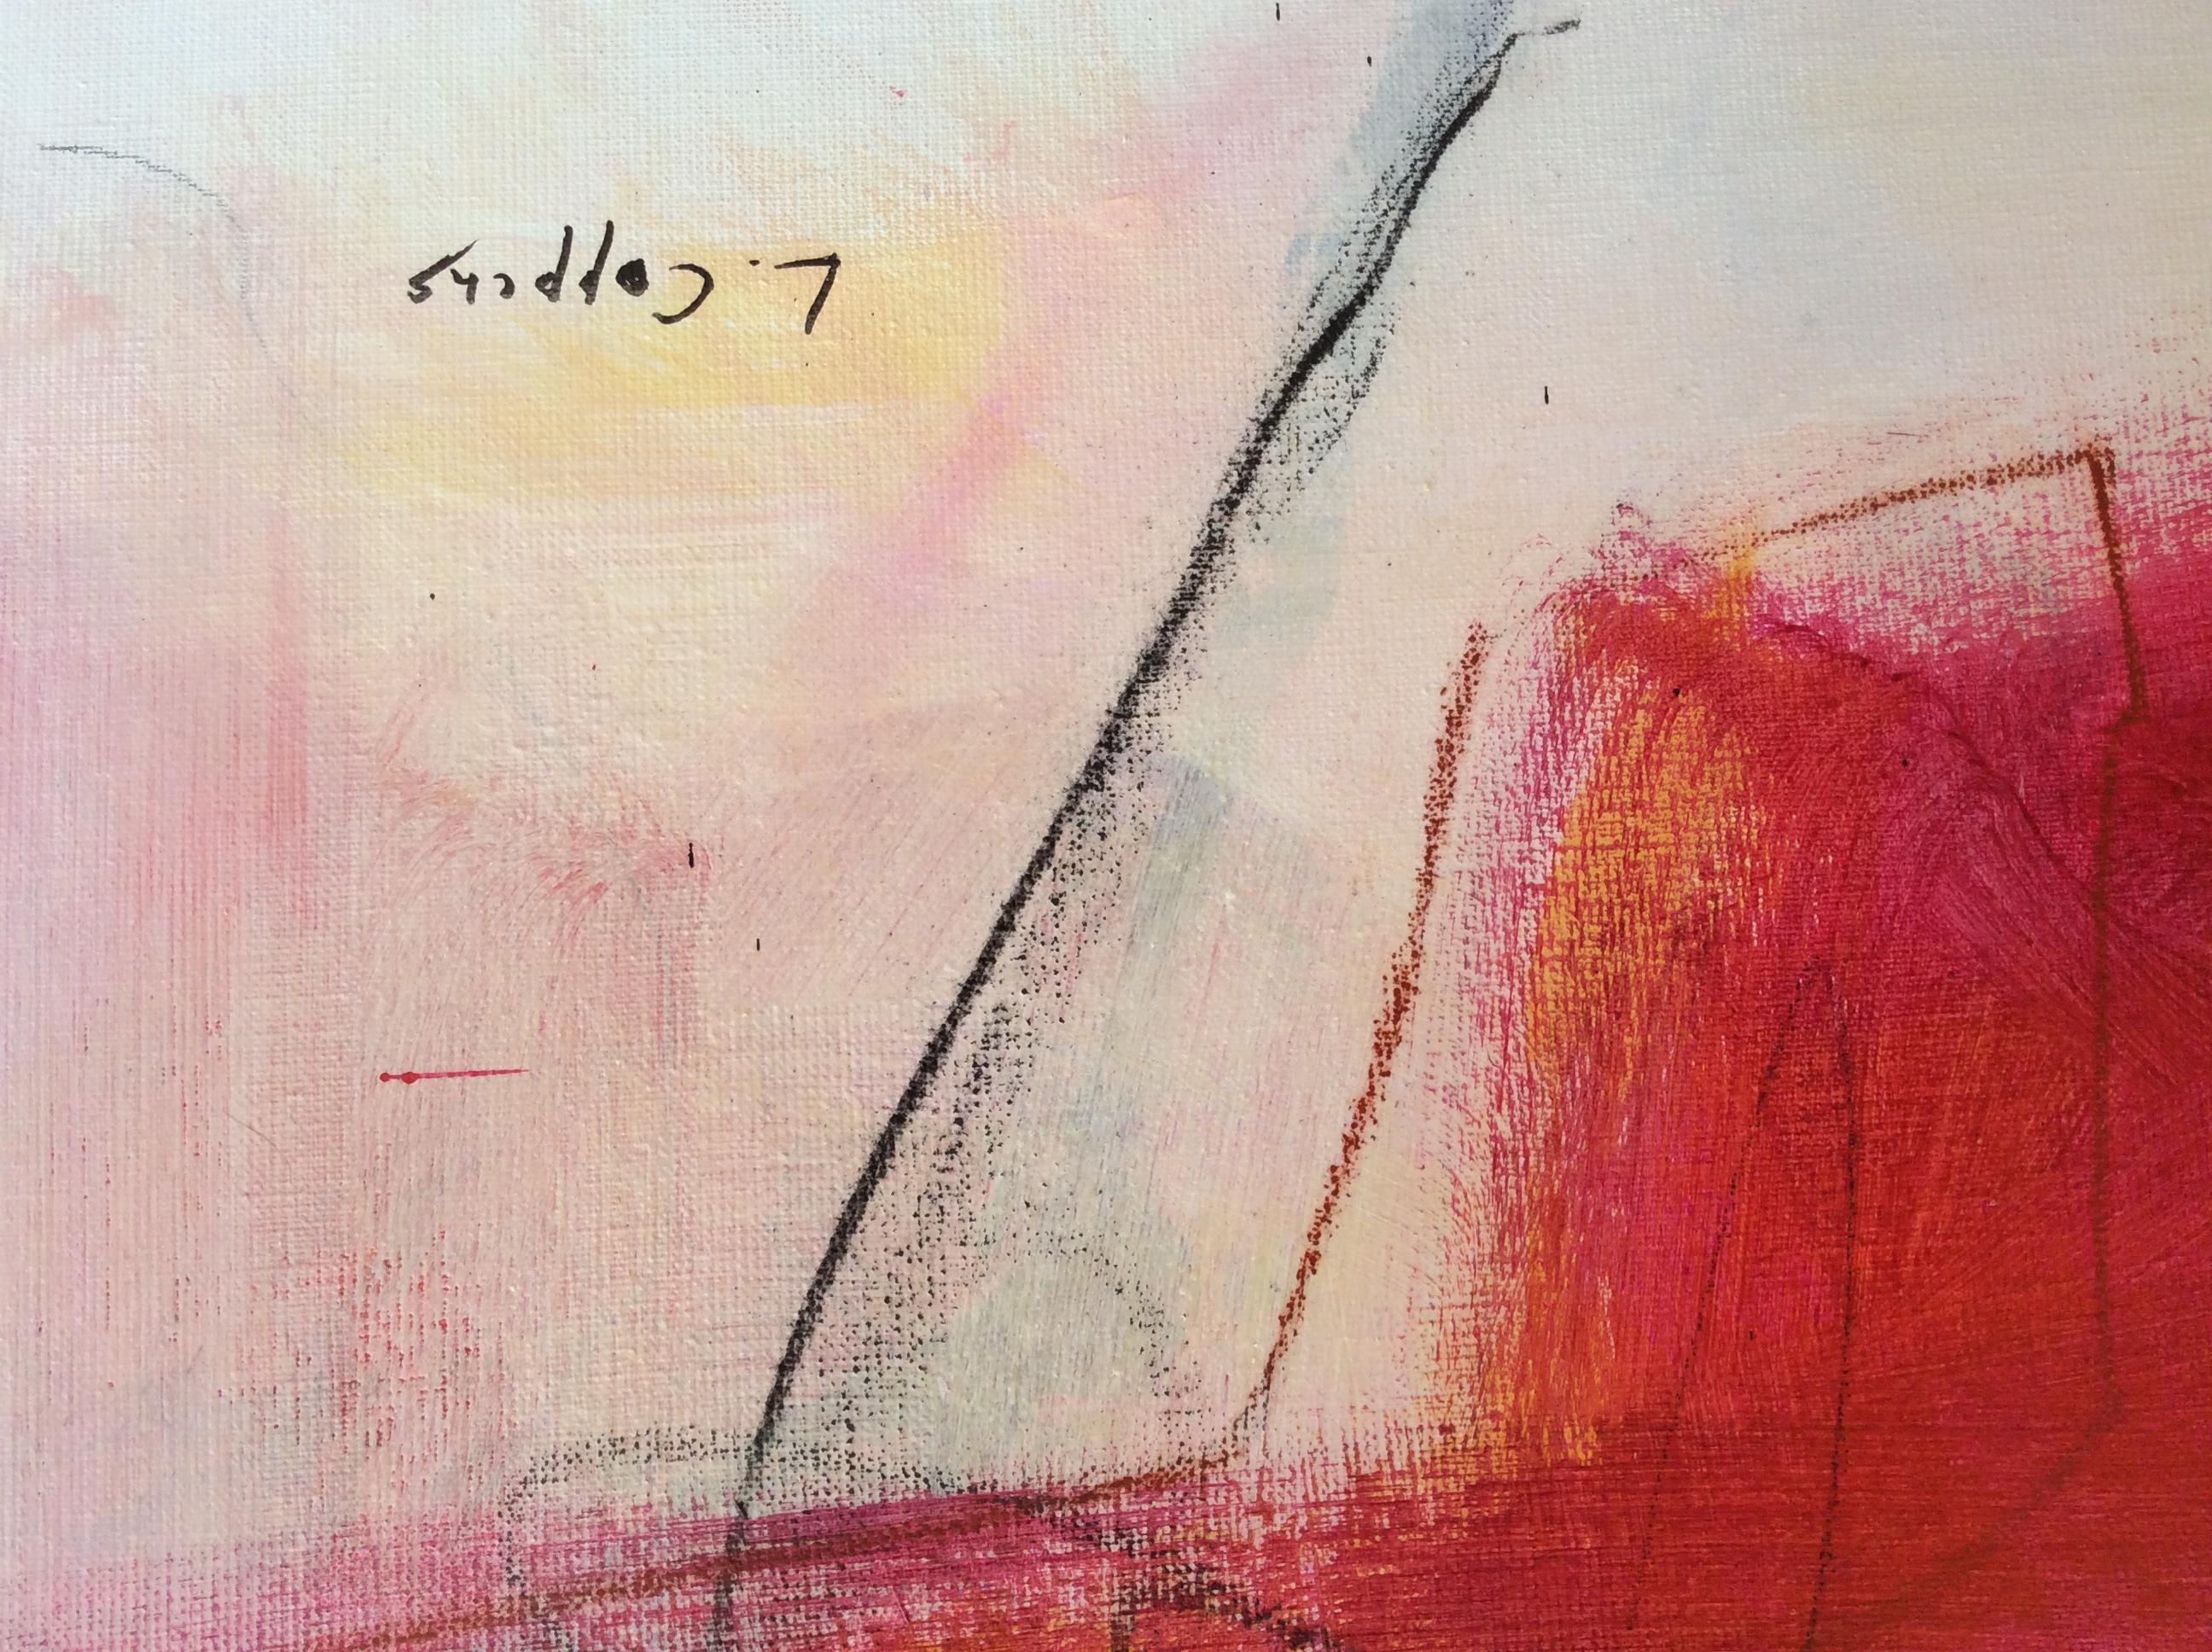 Relation 4 (Abstract painting) 7